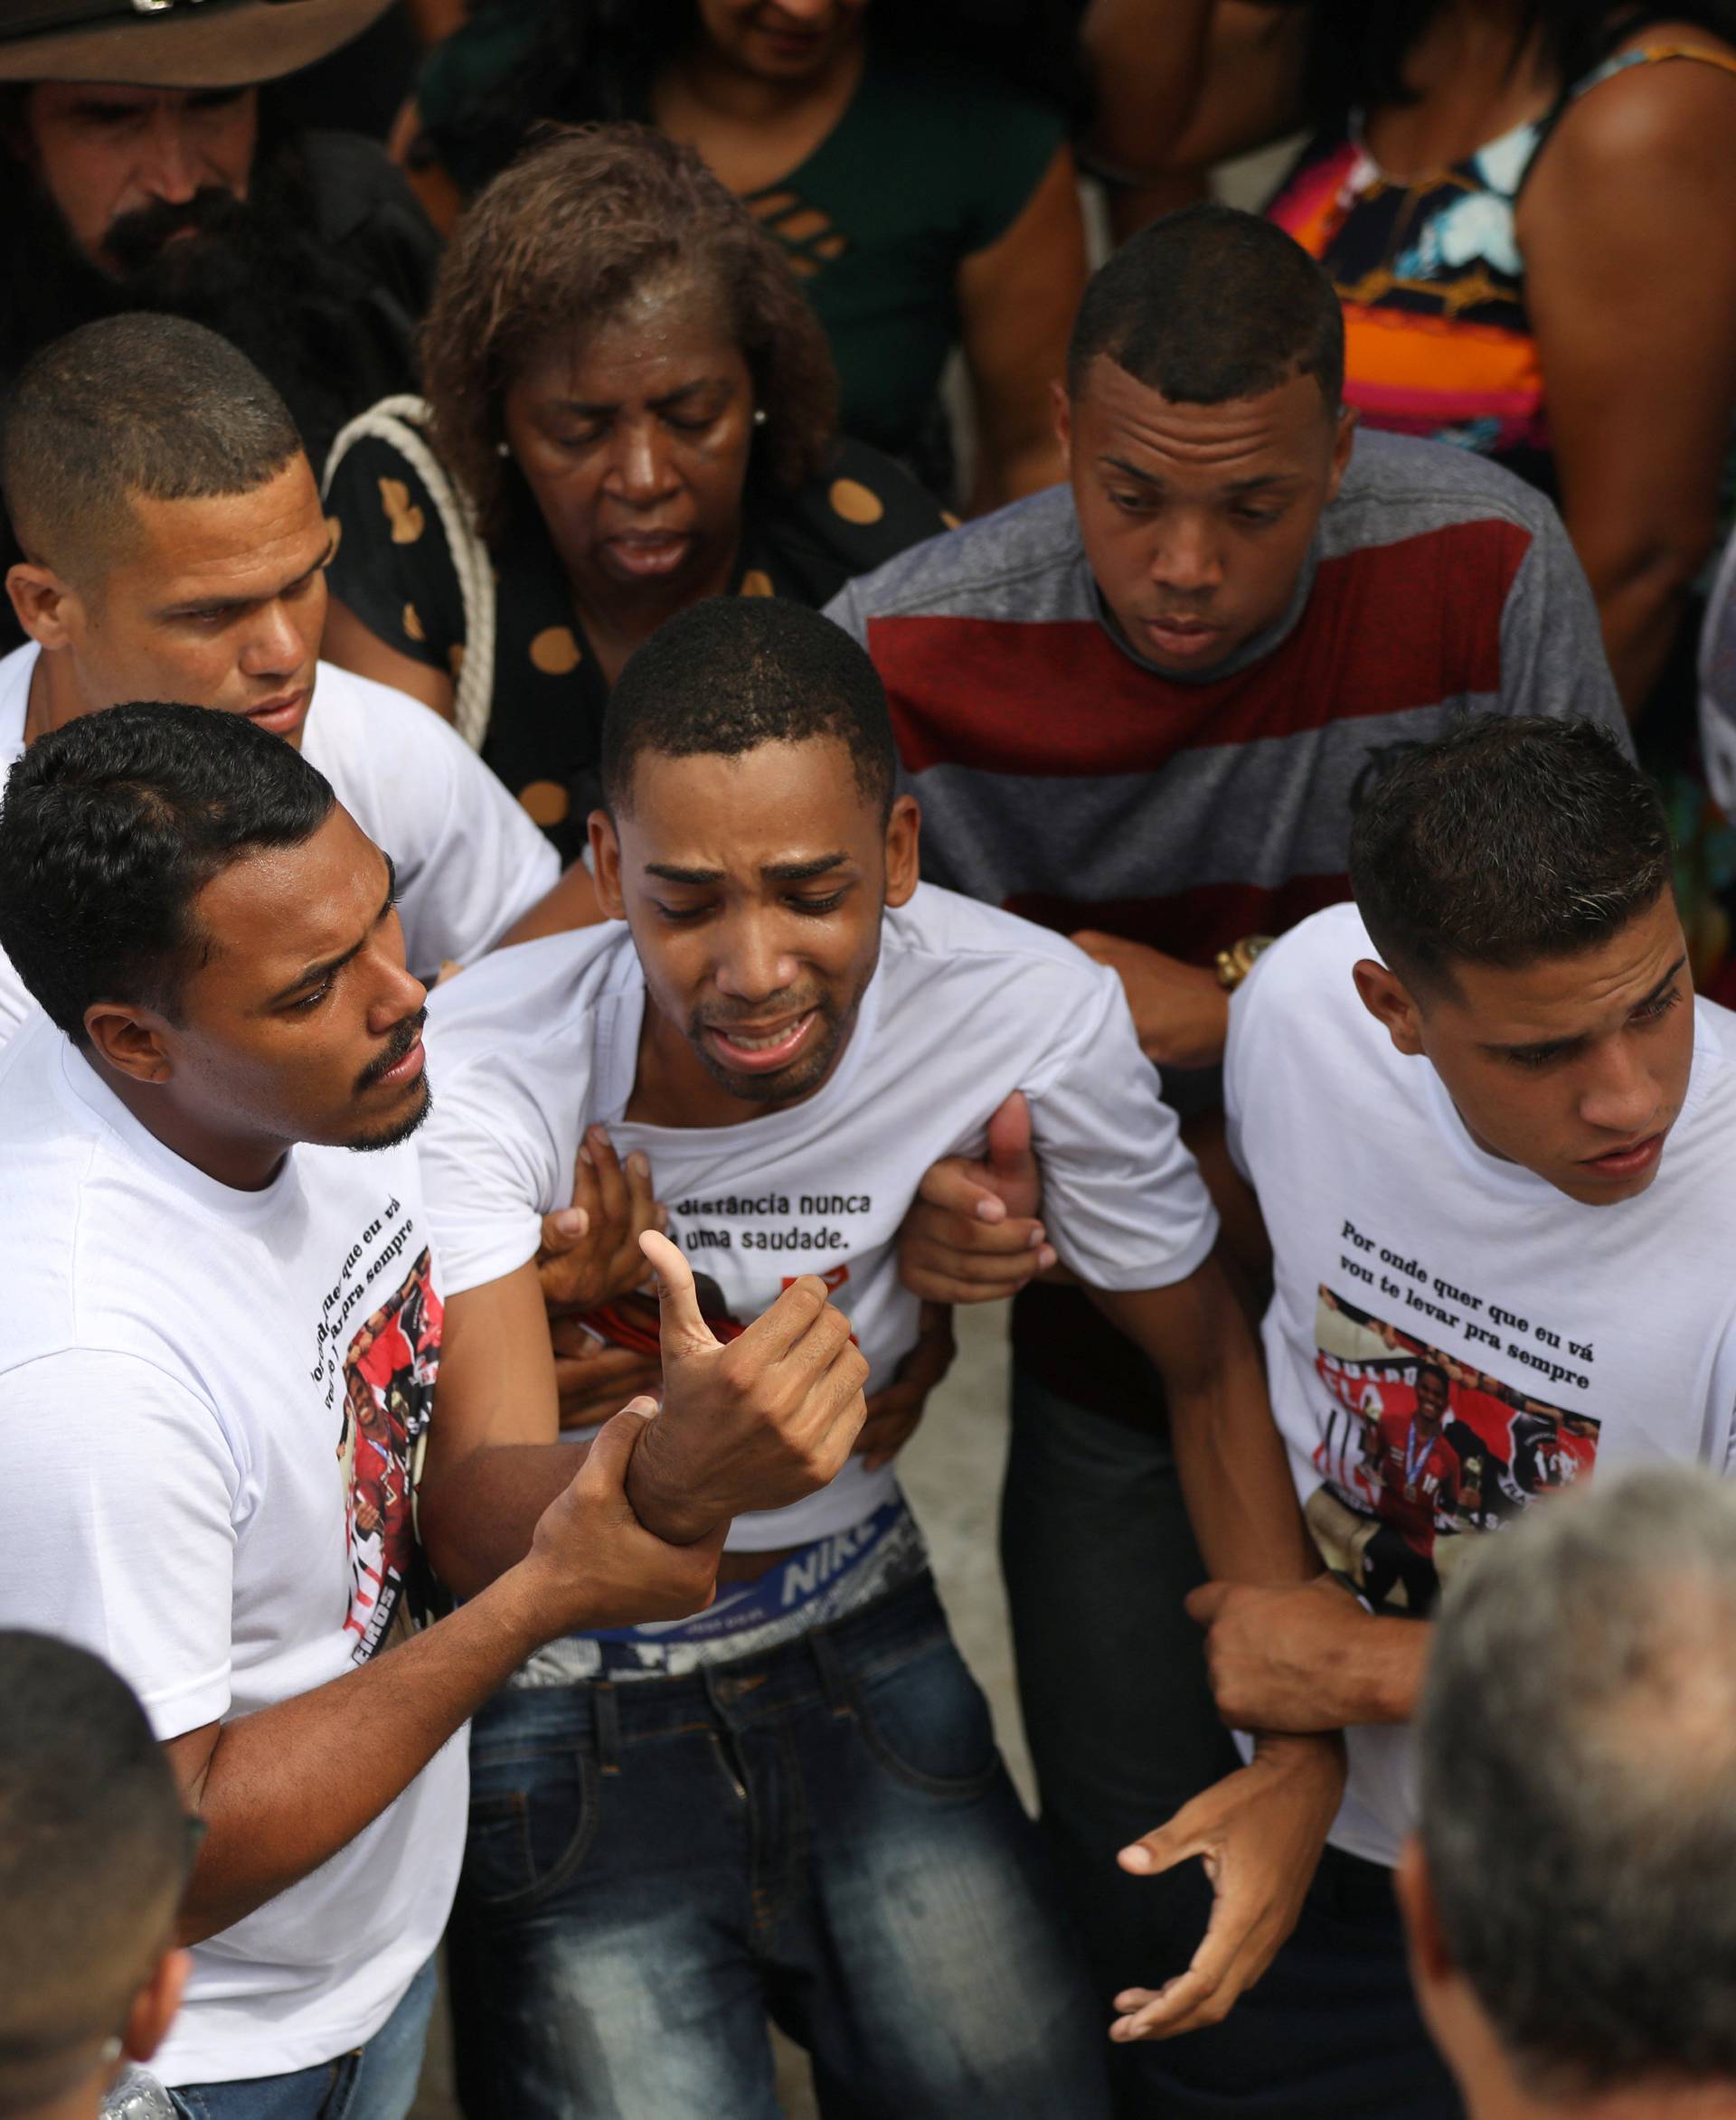 Relatives and friends of teenage soccer player Samuel Thomas de Souza Rosa, who died in the fire that swept through Flamengo's training ground react during his burial, in Rio de Janeiro